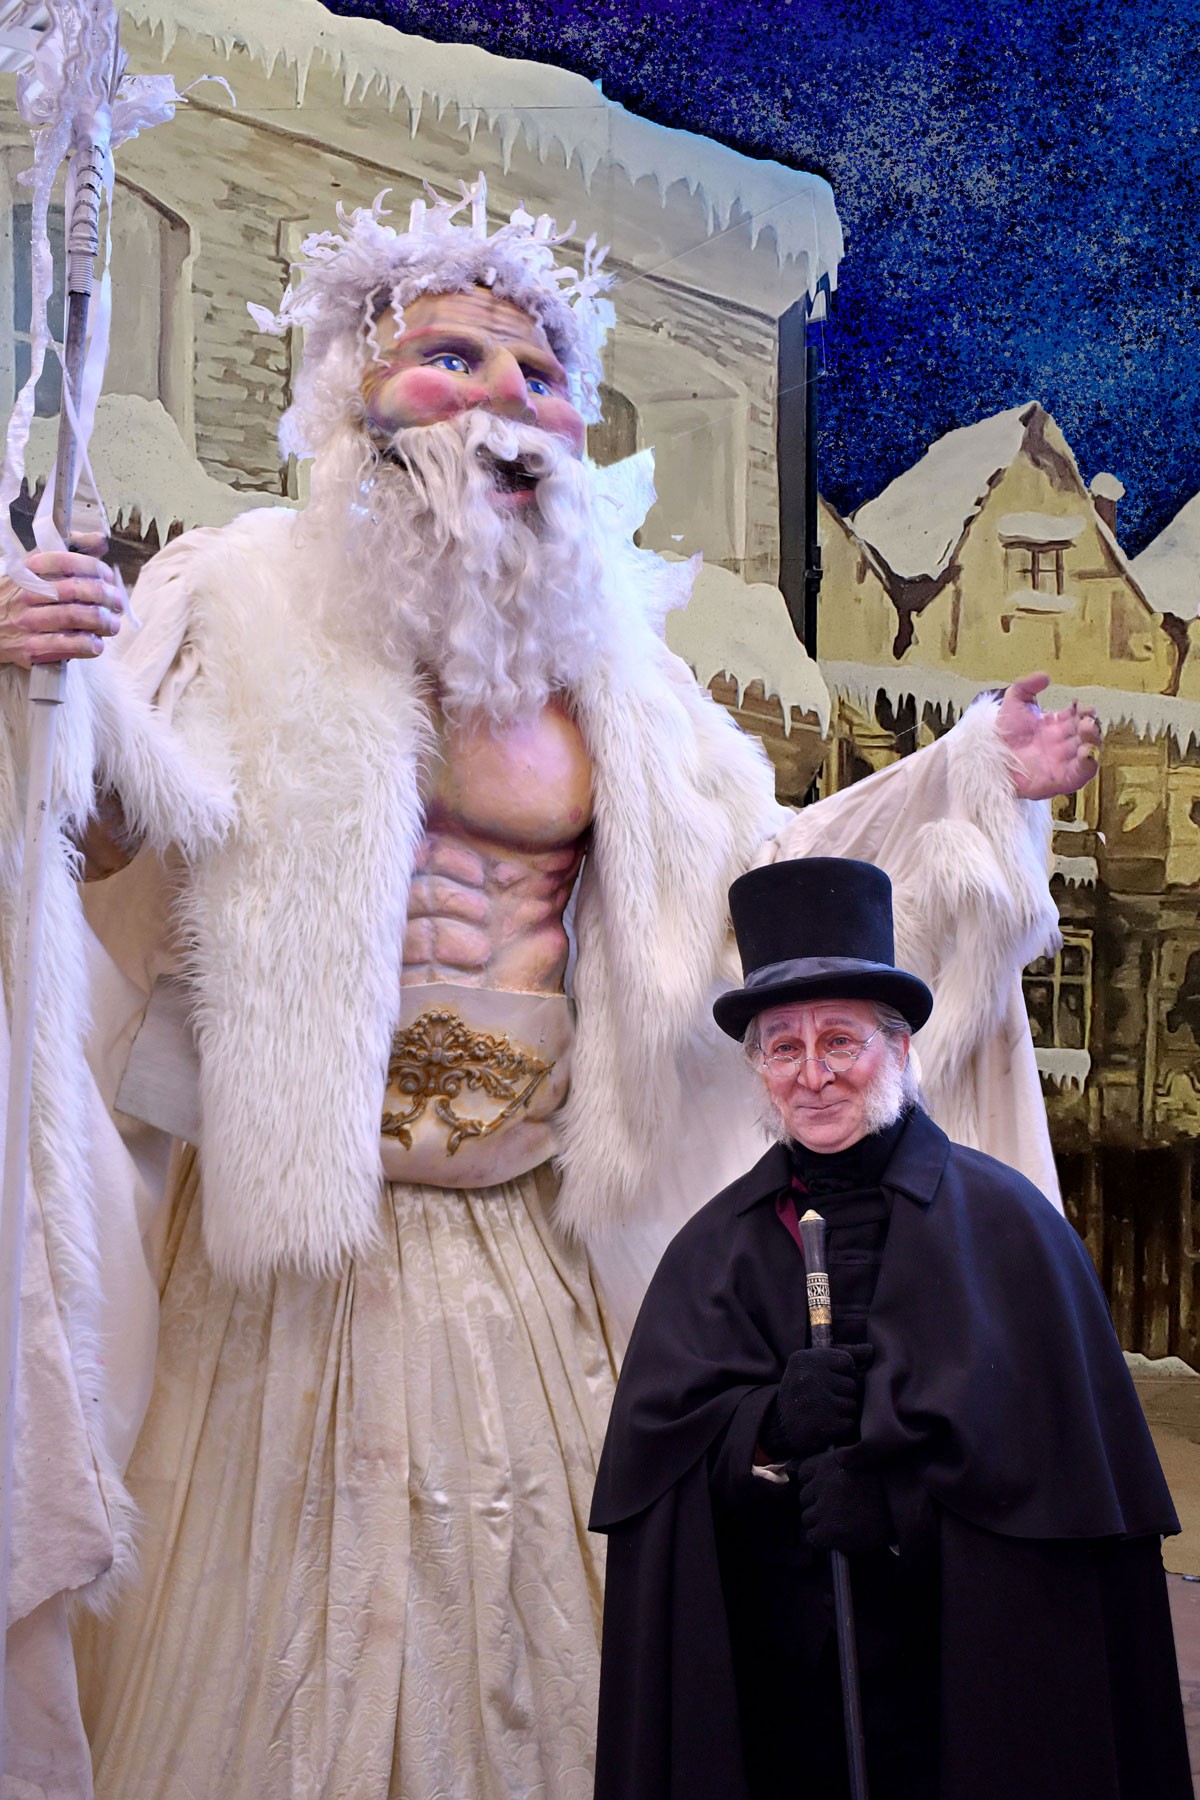 A larger-than-life puppet posing with an actor playing Ebenezer Scrooge.